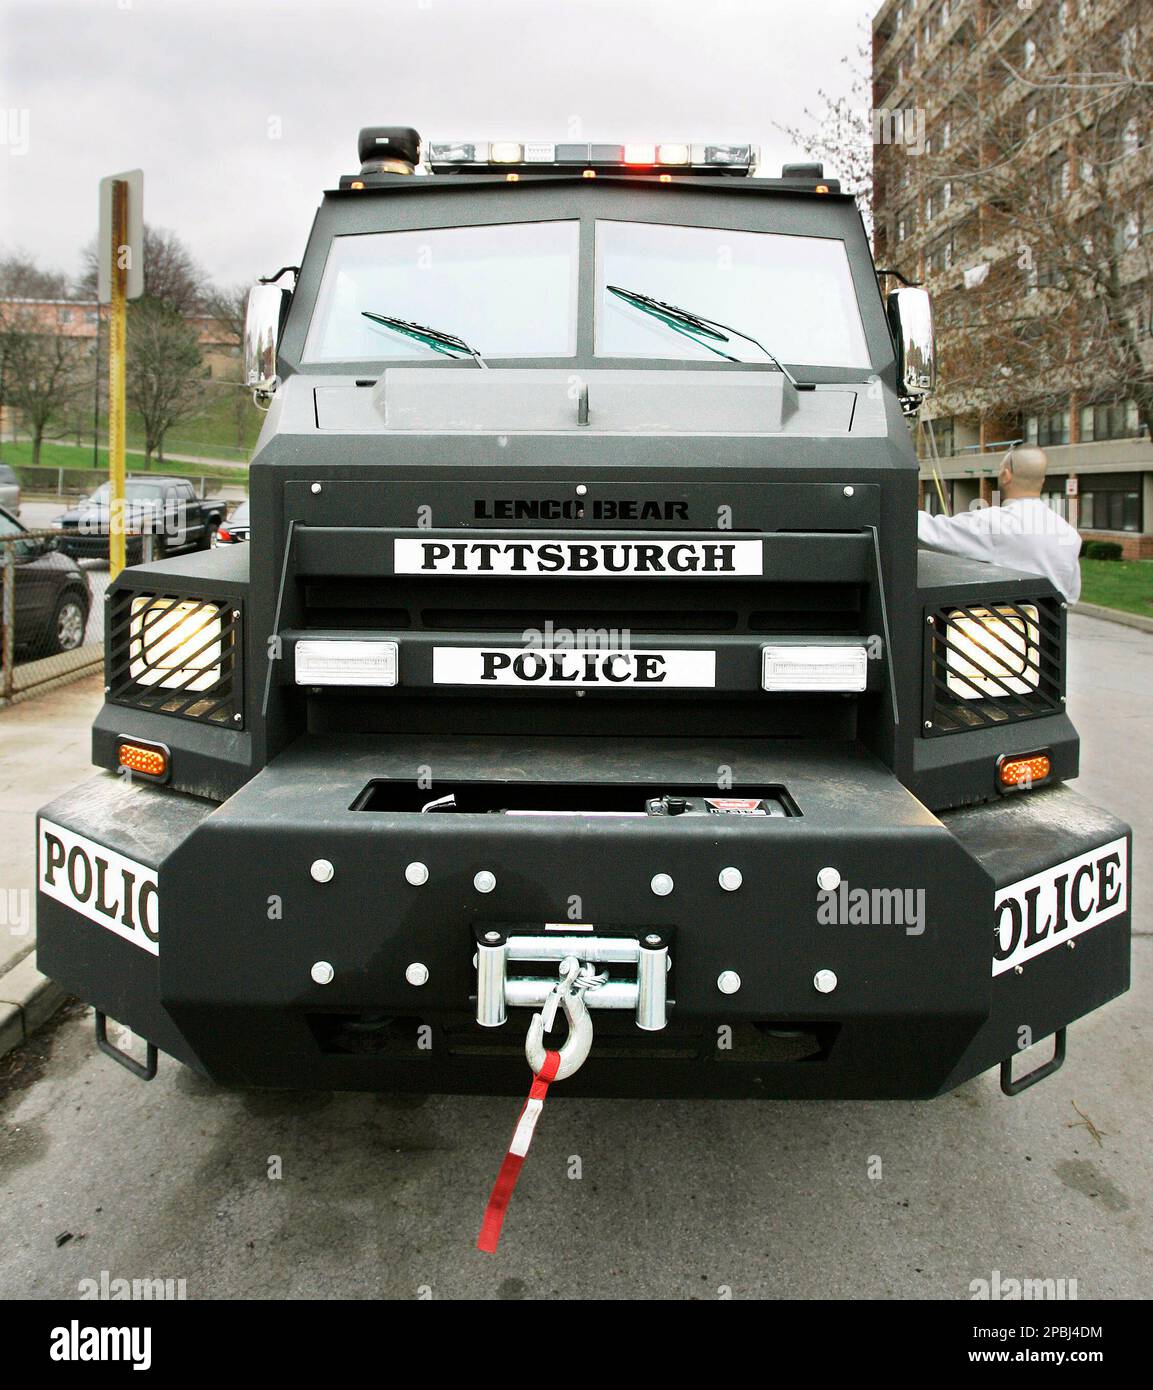 ADVANCE FOR MONDAY, MAY 7 ** The Pittsburgh Police version of the Lenco  B.E.A.R., vetted by its manufacturer as a tactical armored security vehicle  that meets SWAT, Homeland Security and counterterrorism